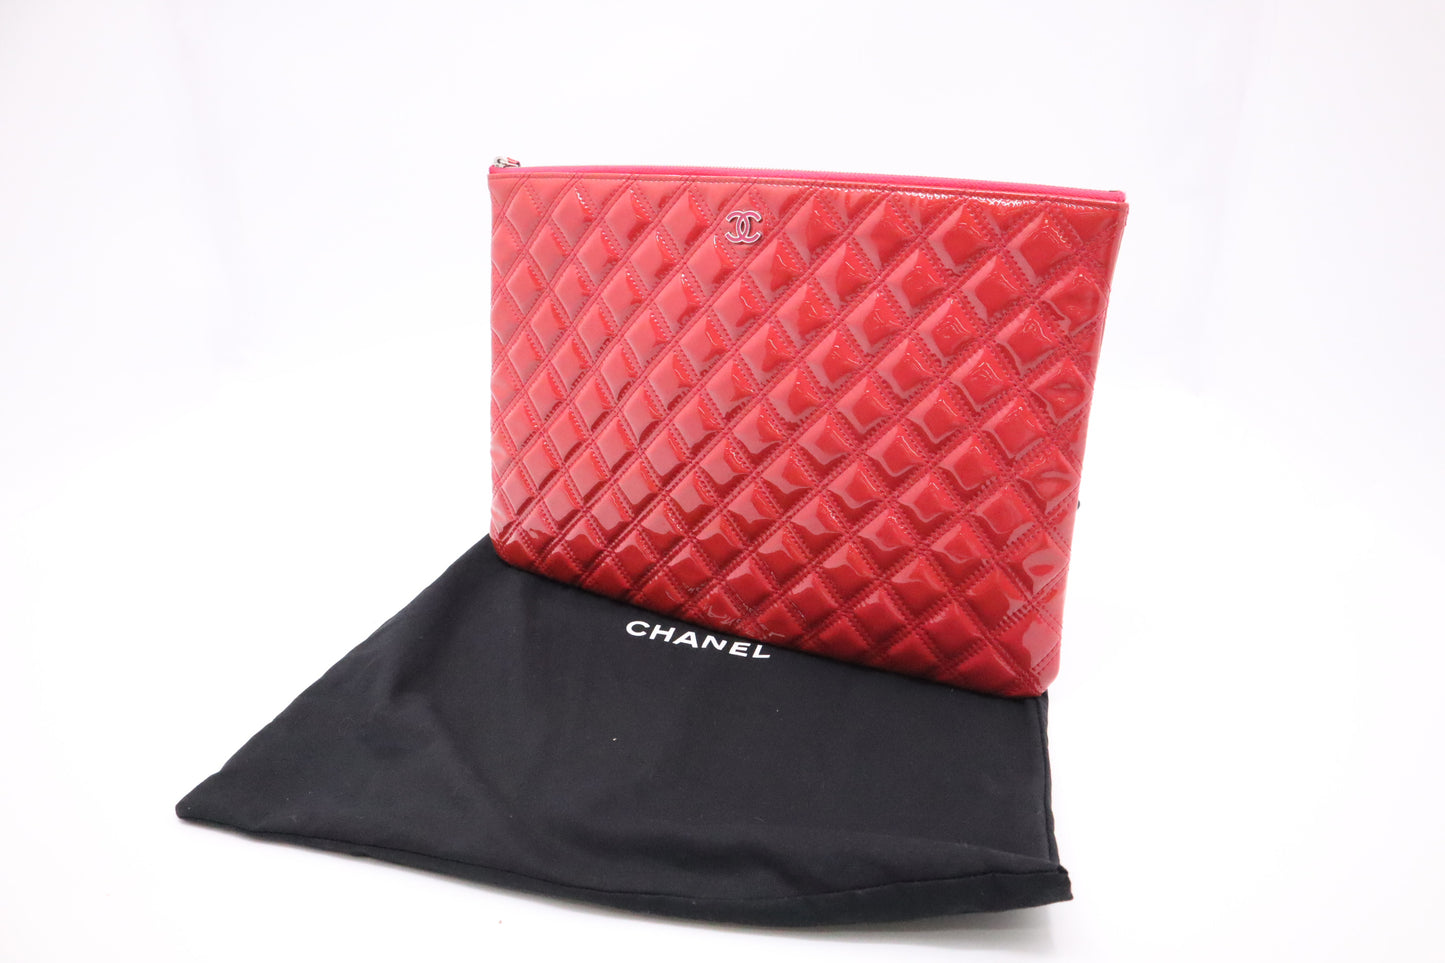 Chanel Large O Case in Pink Patent Leather